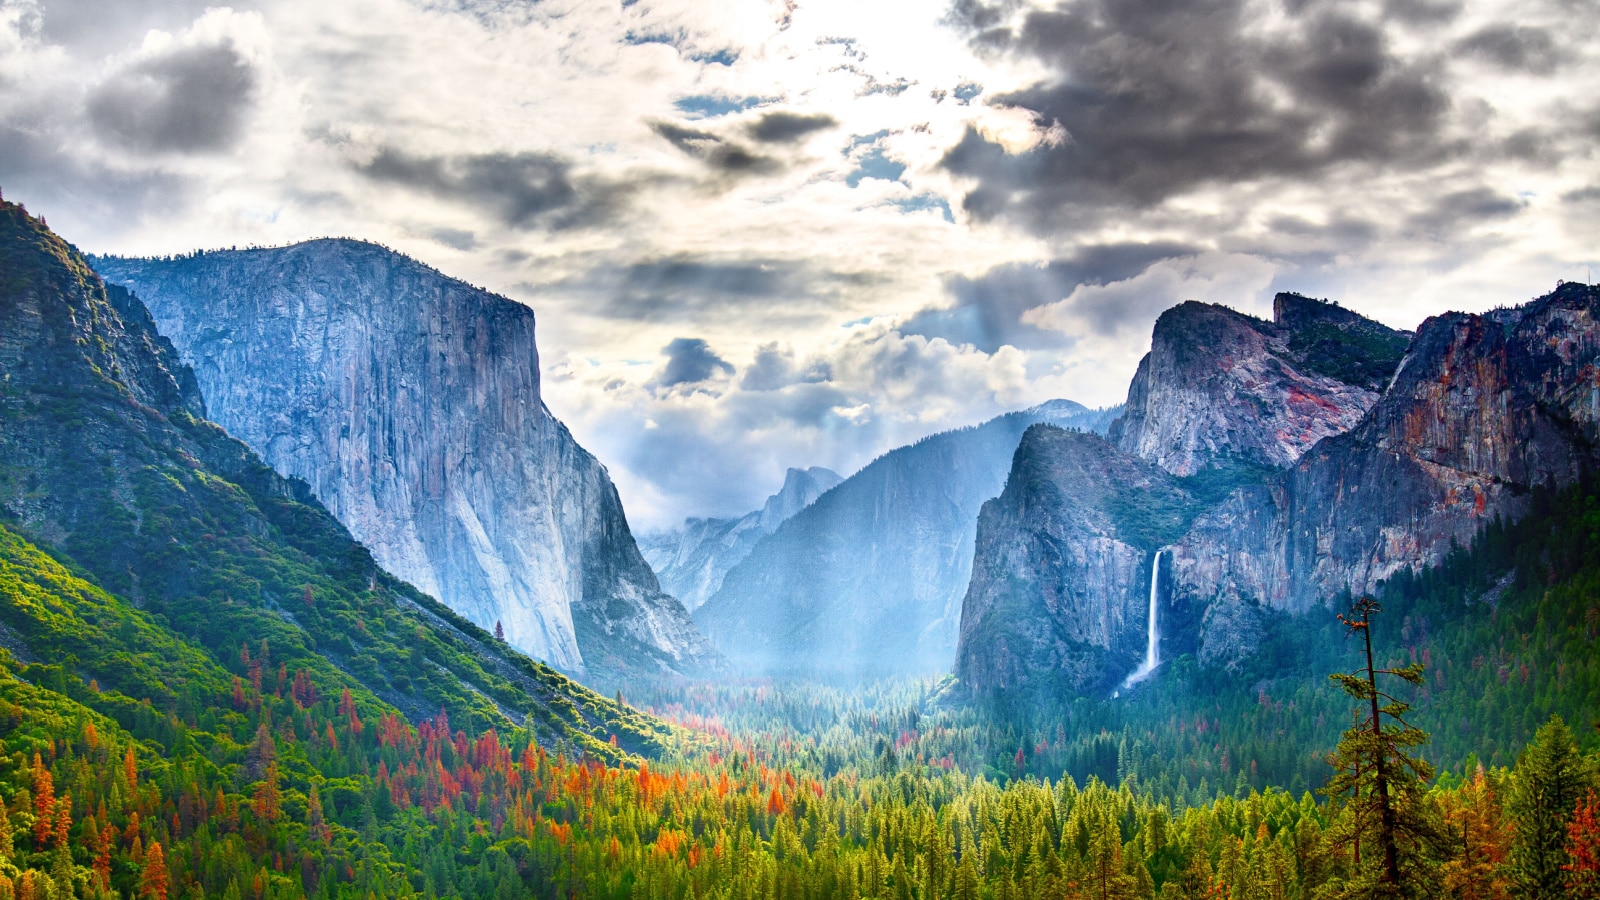 <p>Situated in the Sierra Nevada Mountains, Yosemite is renowned for its towering waterfalls, ancient giant sequoia trees, granite cliffs like El Capitan and Half Dome, and diverse ecosystems, making it a mecca for outdoor enthusiasts and photographers.</p>